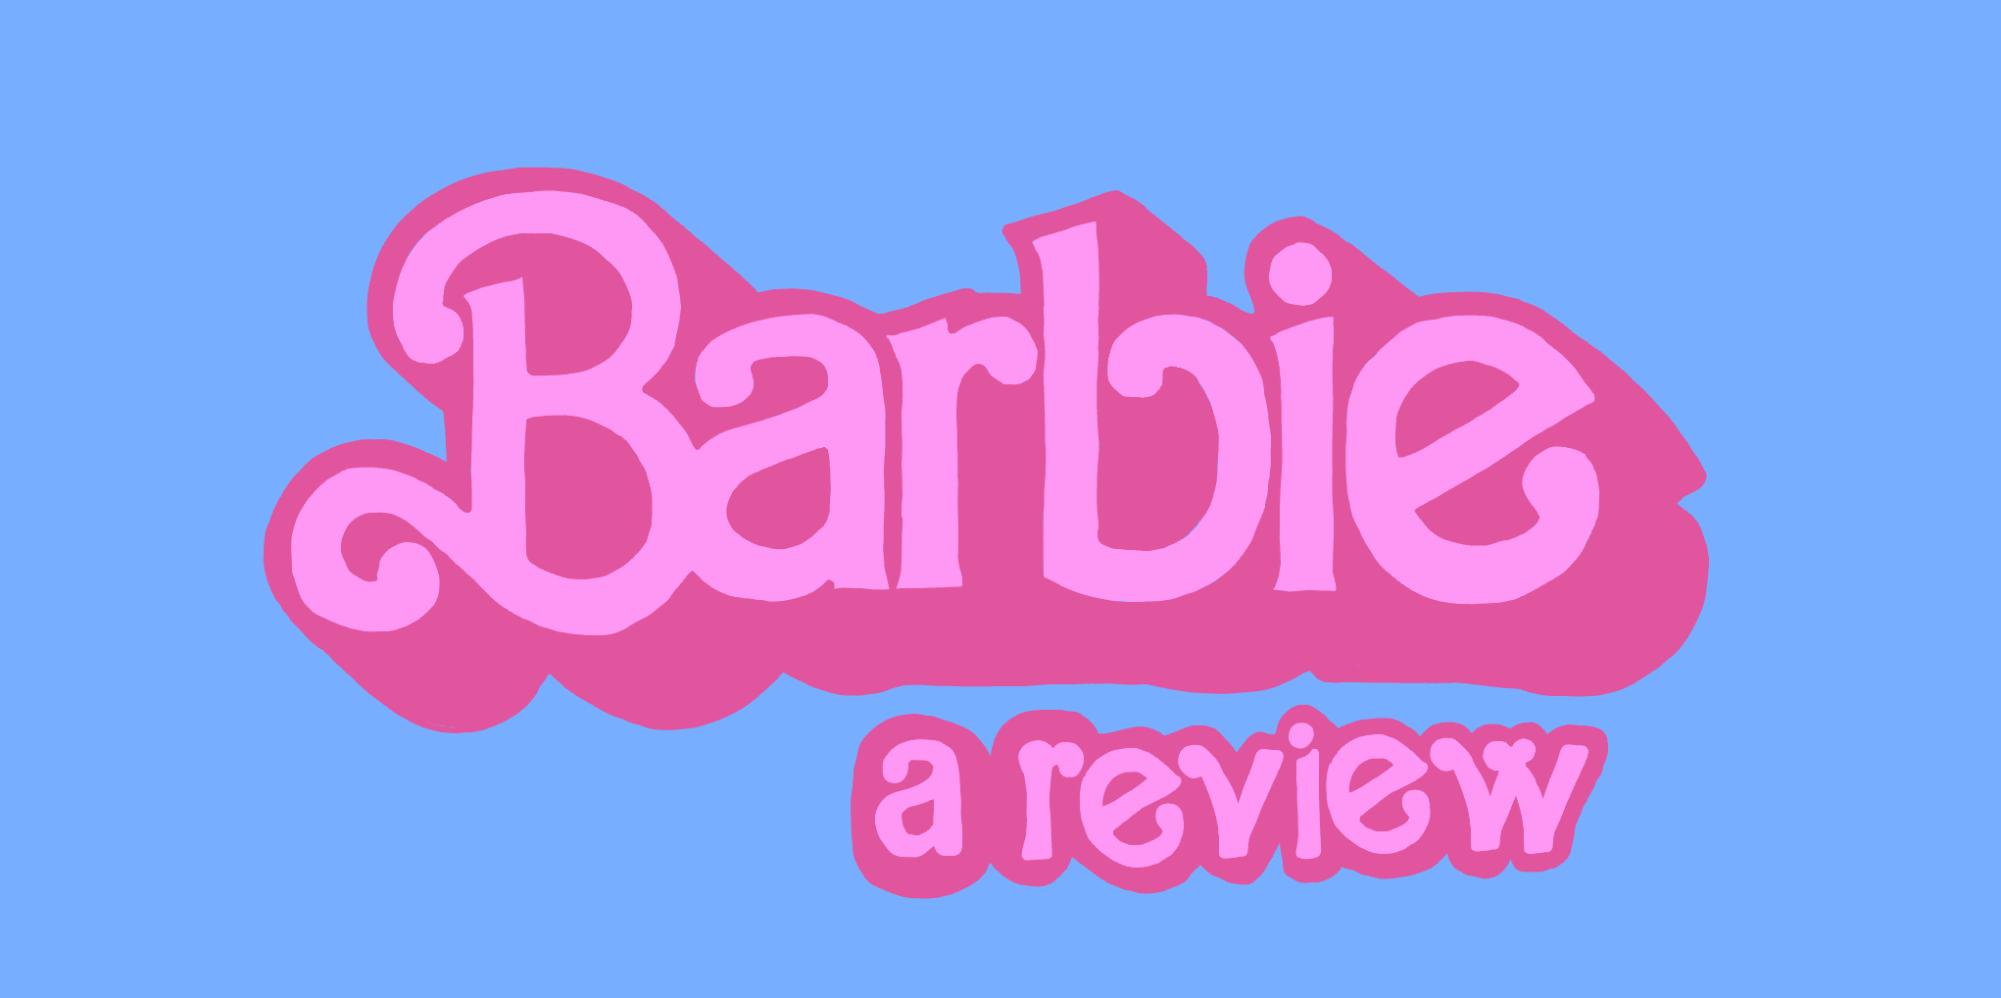 The Barbie movie was a box office hit this summer. While it is a comedy, Barbie includes an in depth commentary on societal issues.